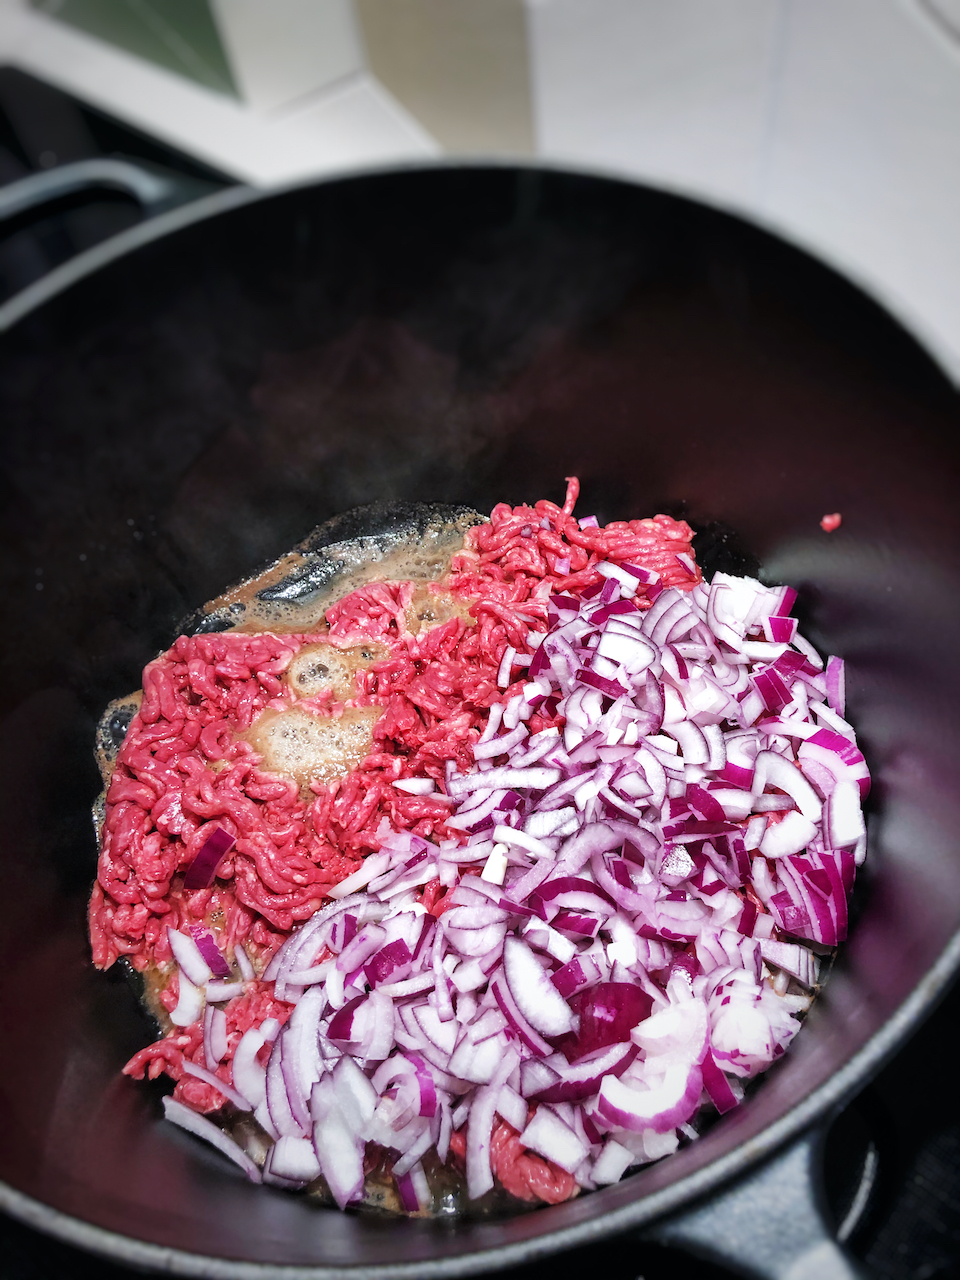 Minced meat and red onion